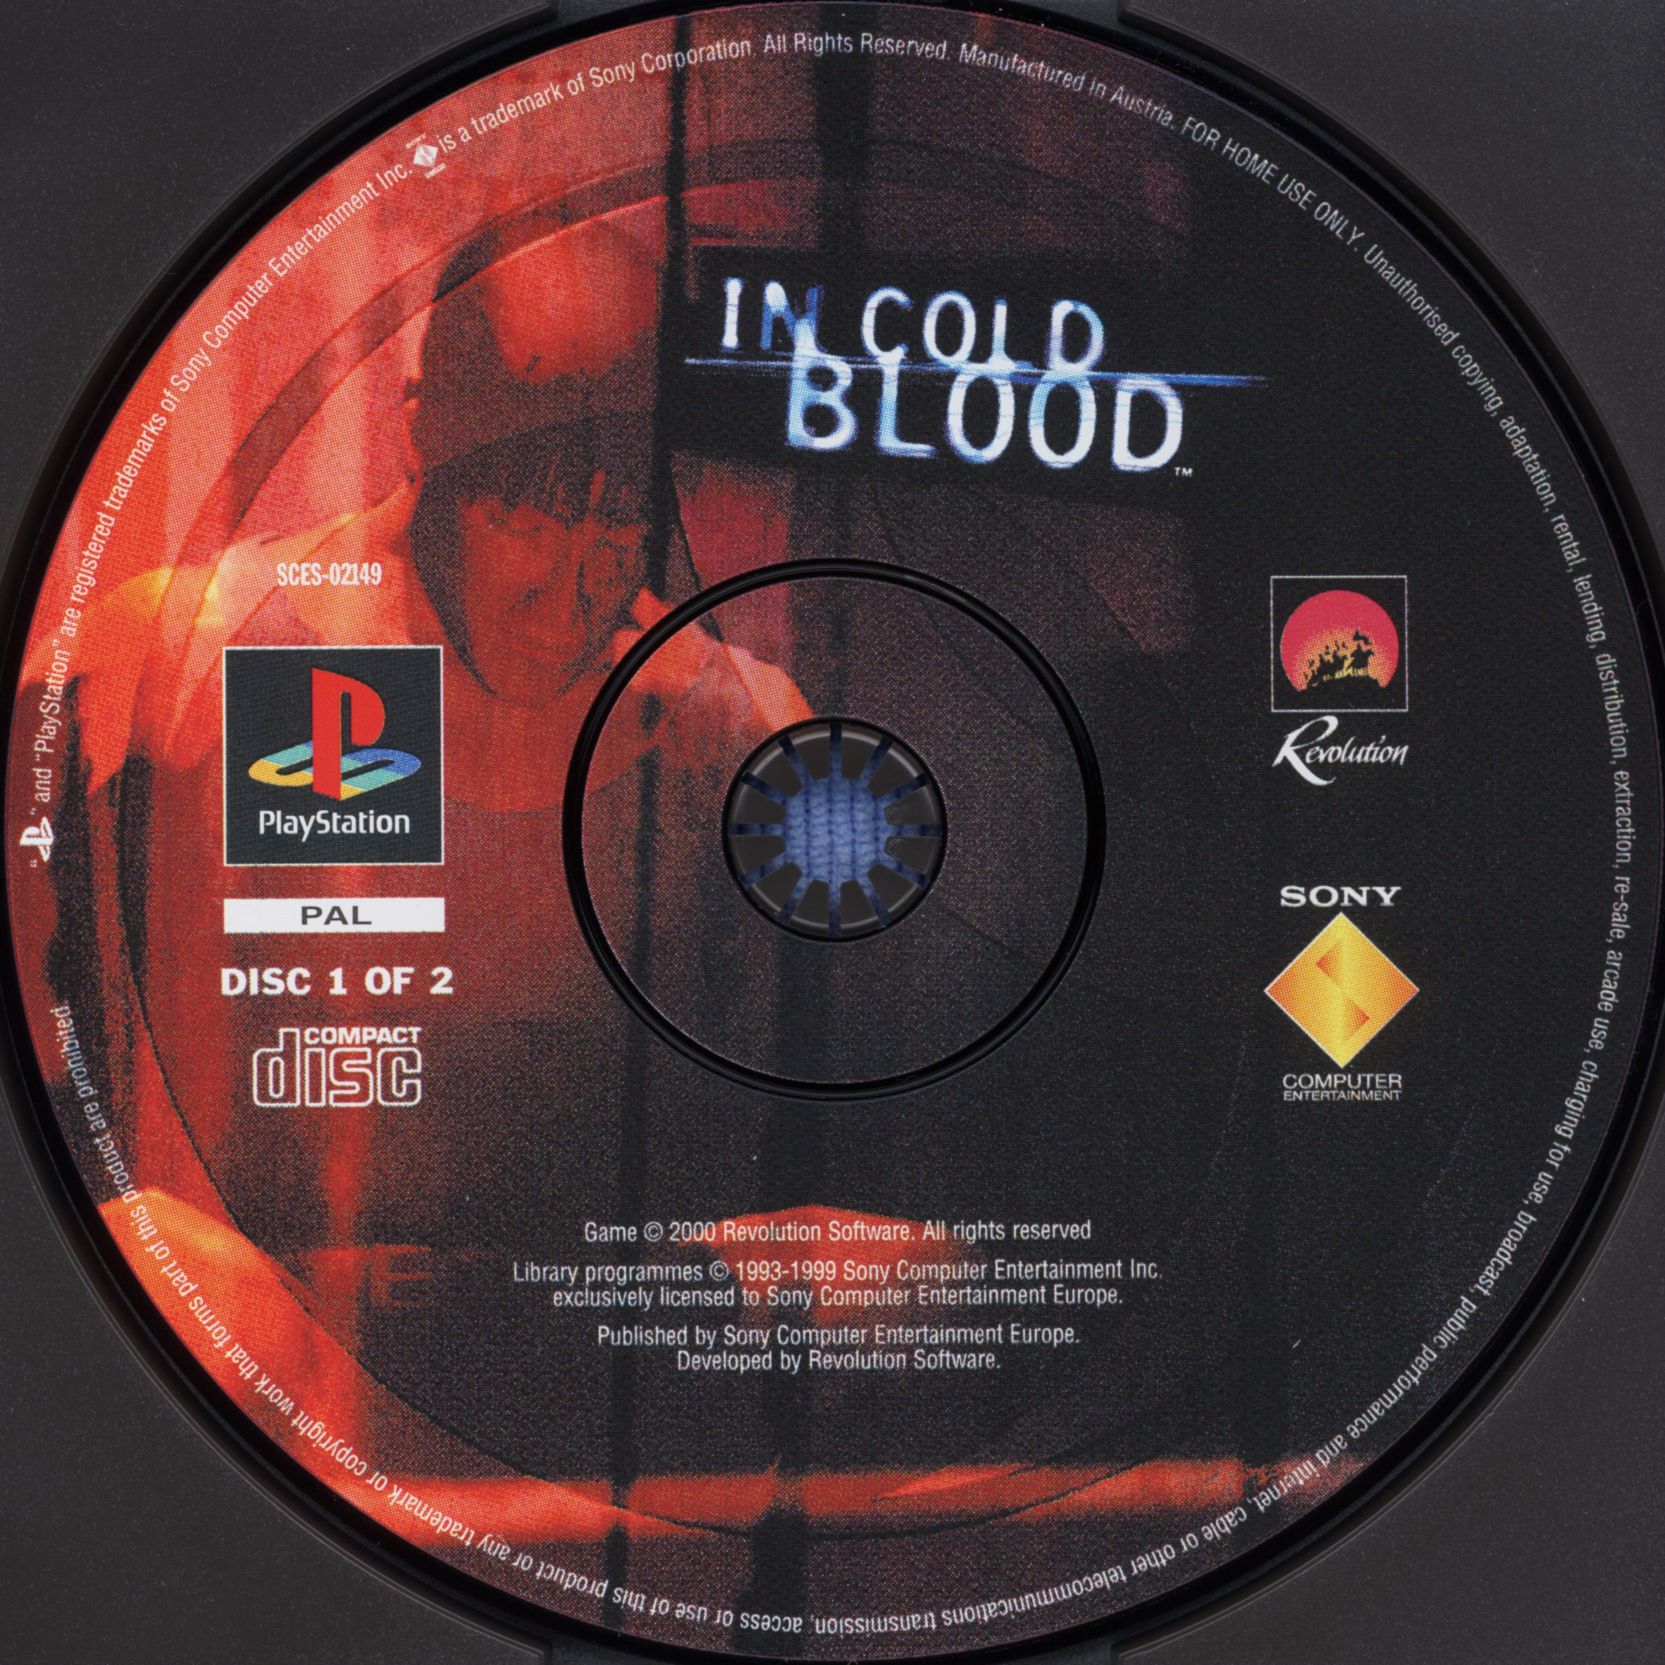 IN COLD BLOOD (PAL) - DISC